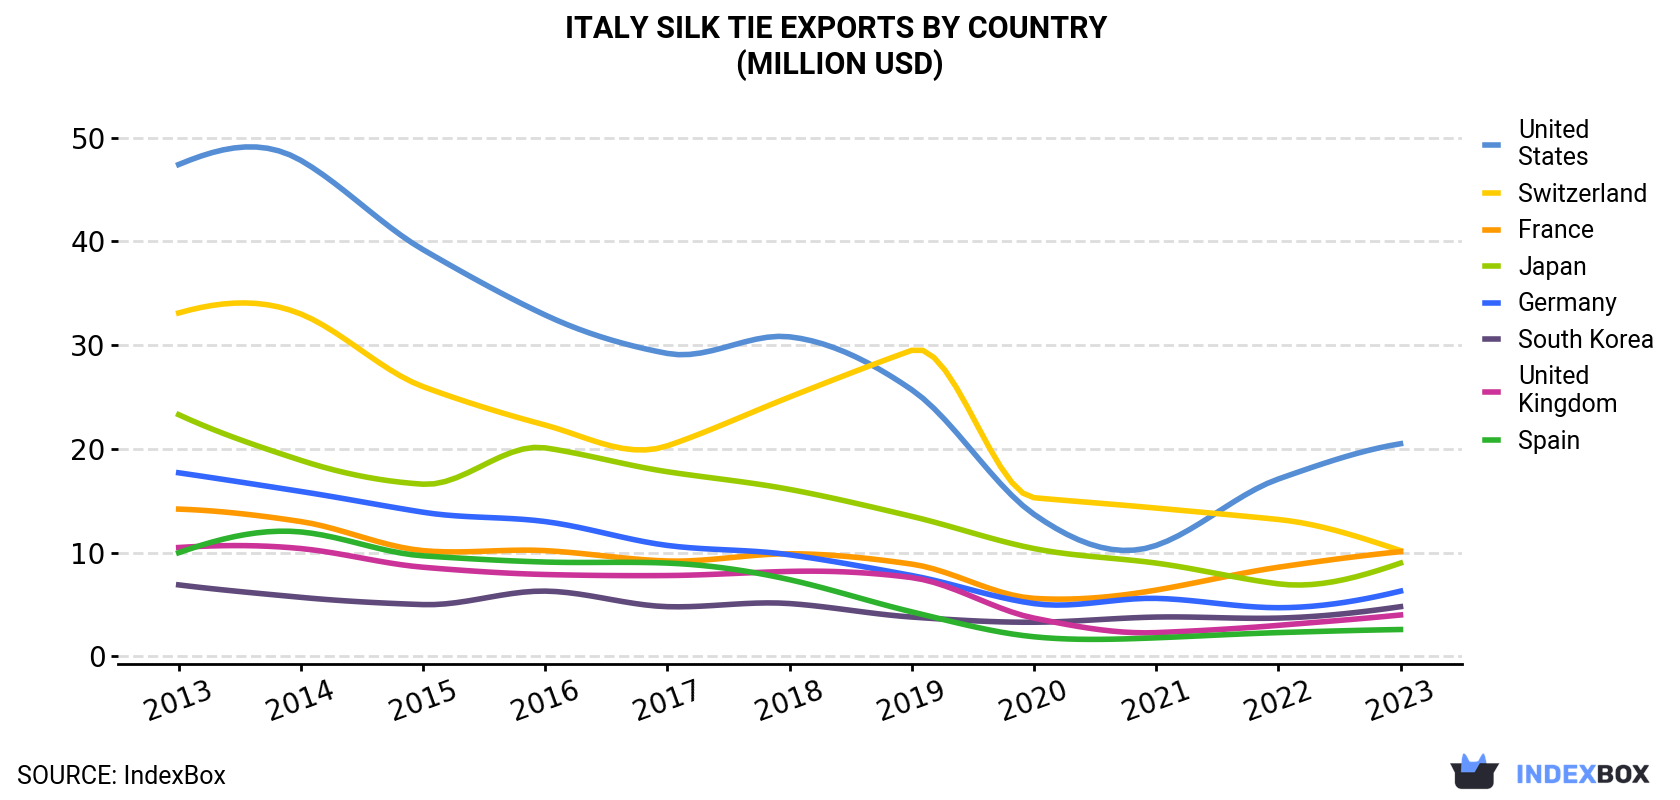 Italy Silk Tie Exports By Country (Million USD)